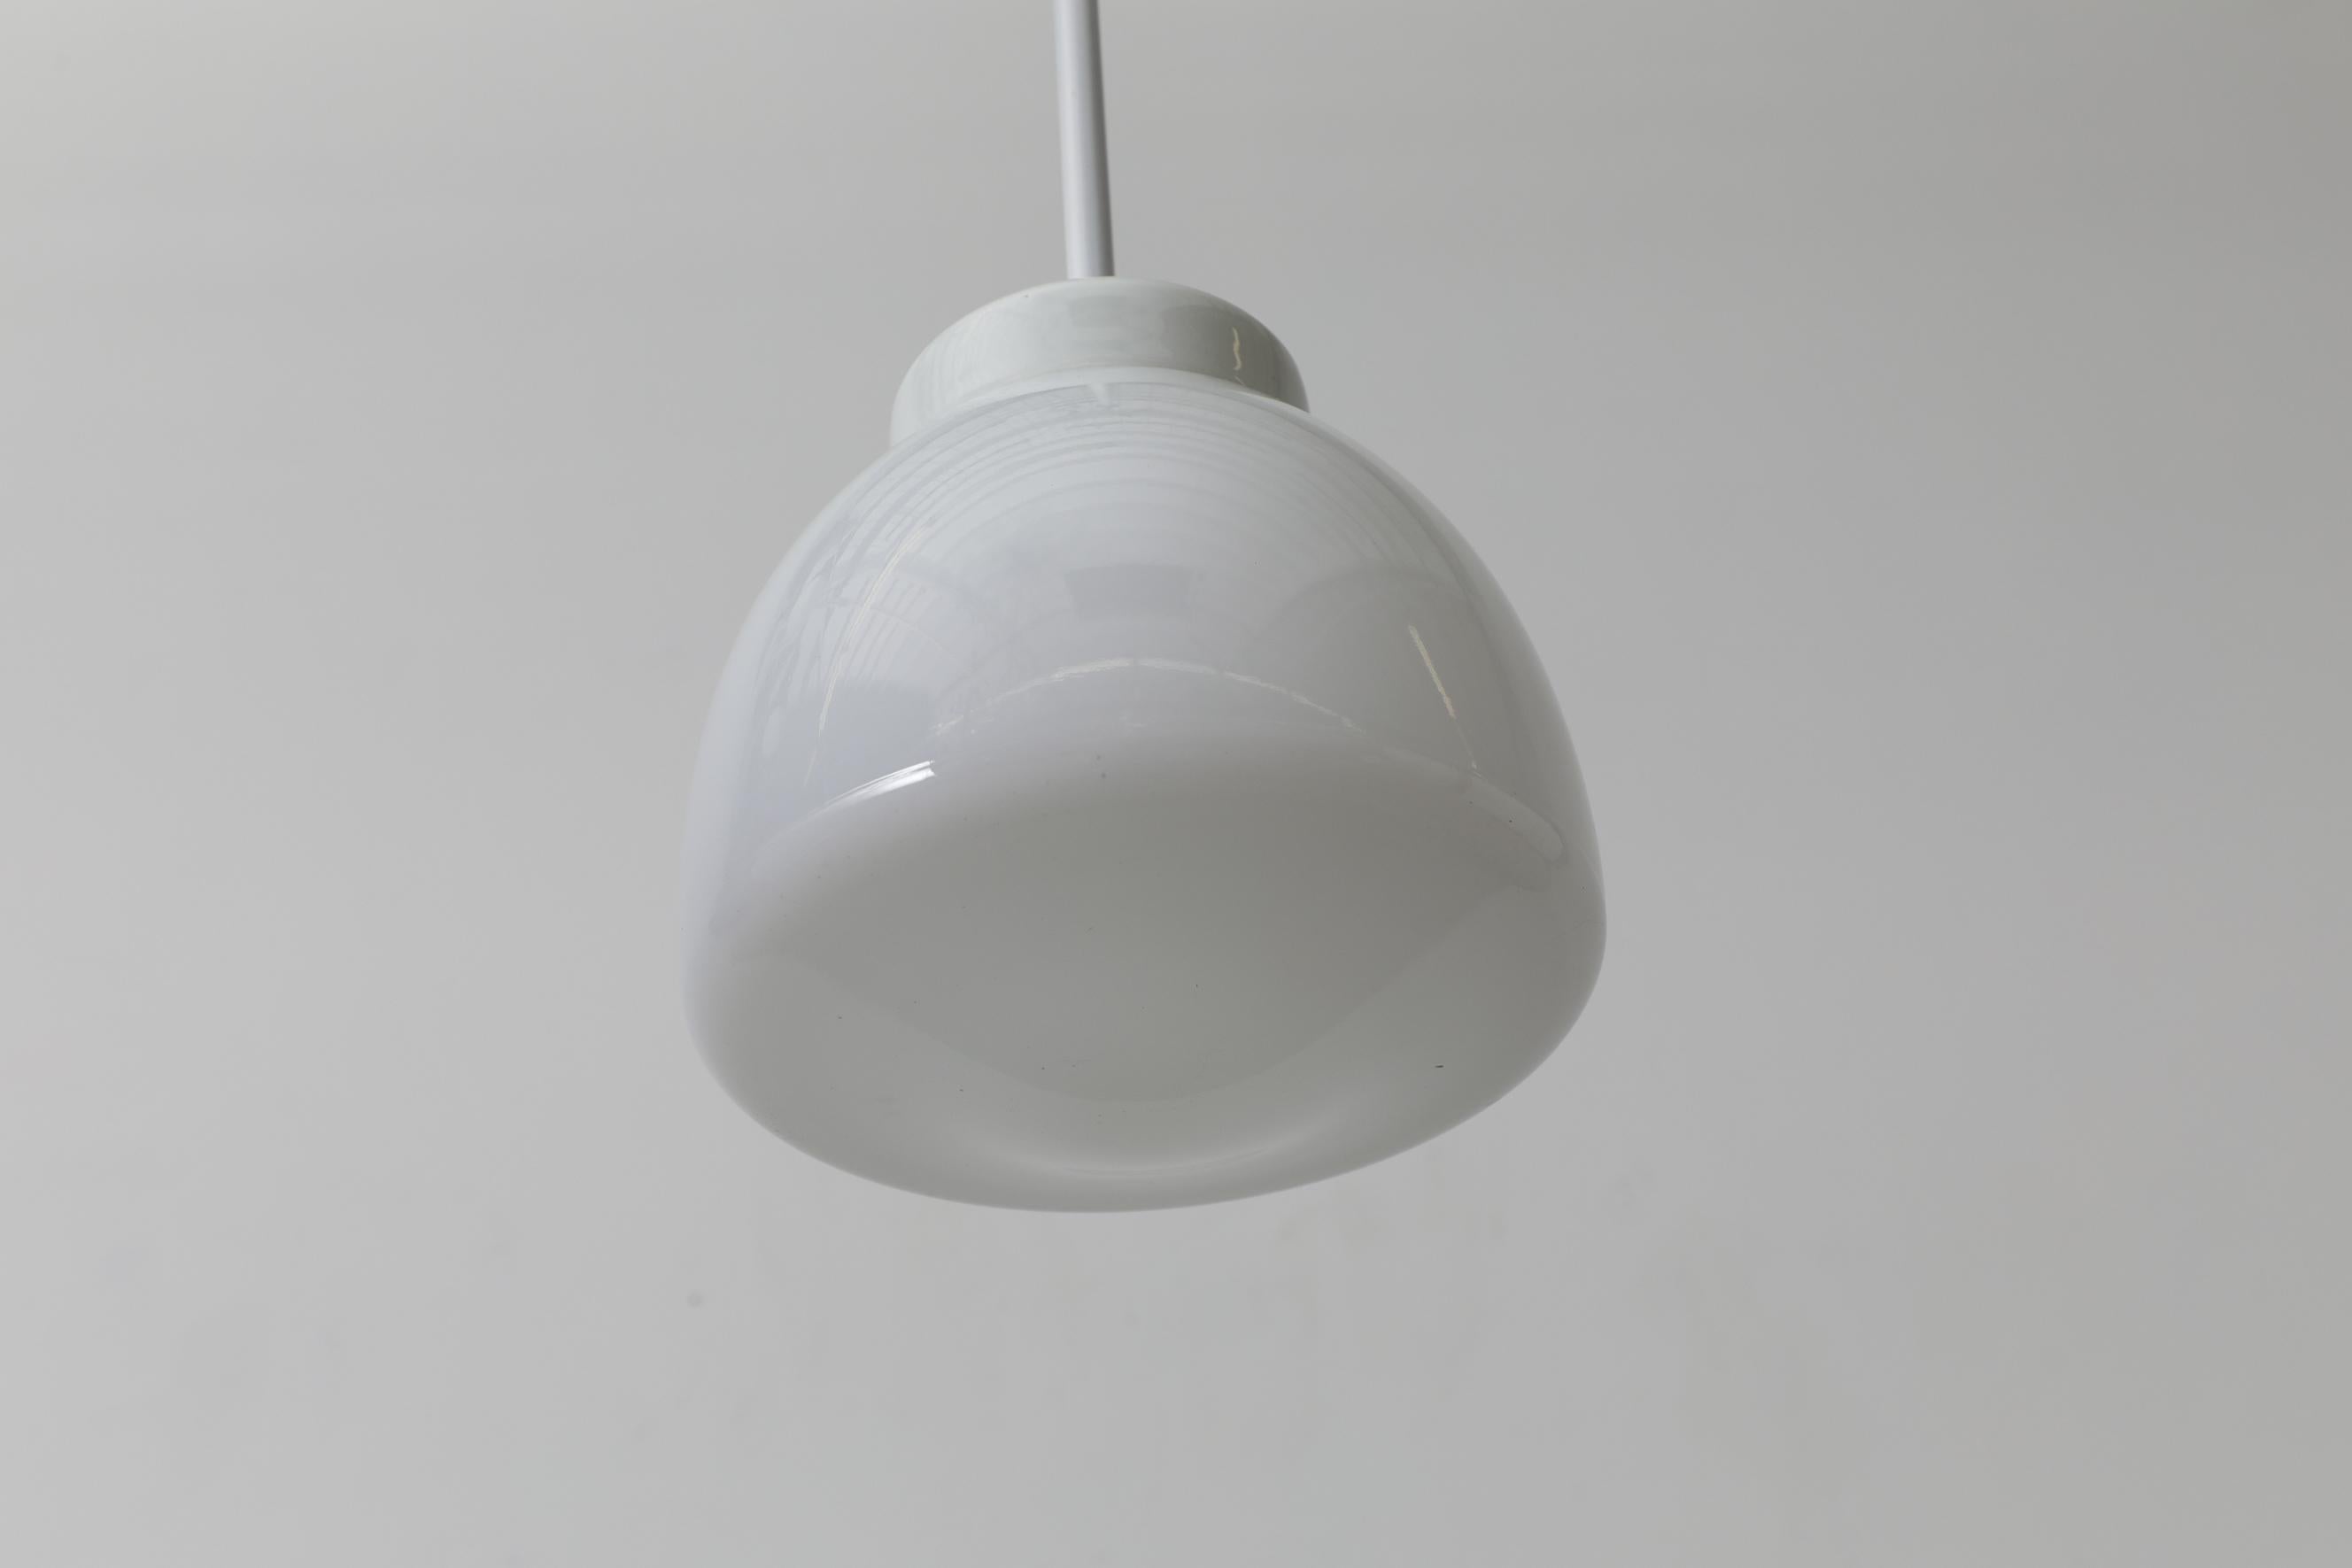 Rare Mid-Century Wagenfeld Pendant w/ Opaline Glass Shade & White Ceramic Mount In Good Condition For Sale In Los Angeles, CA